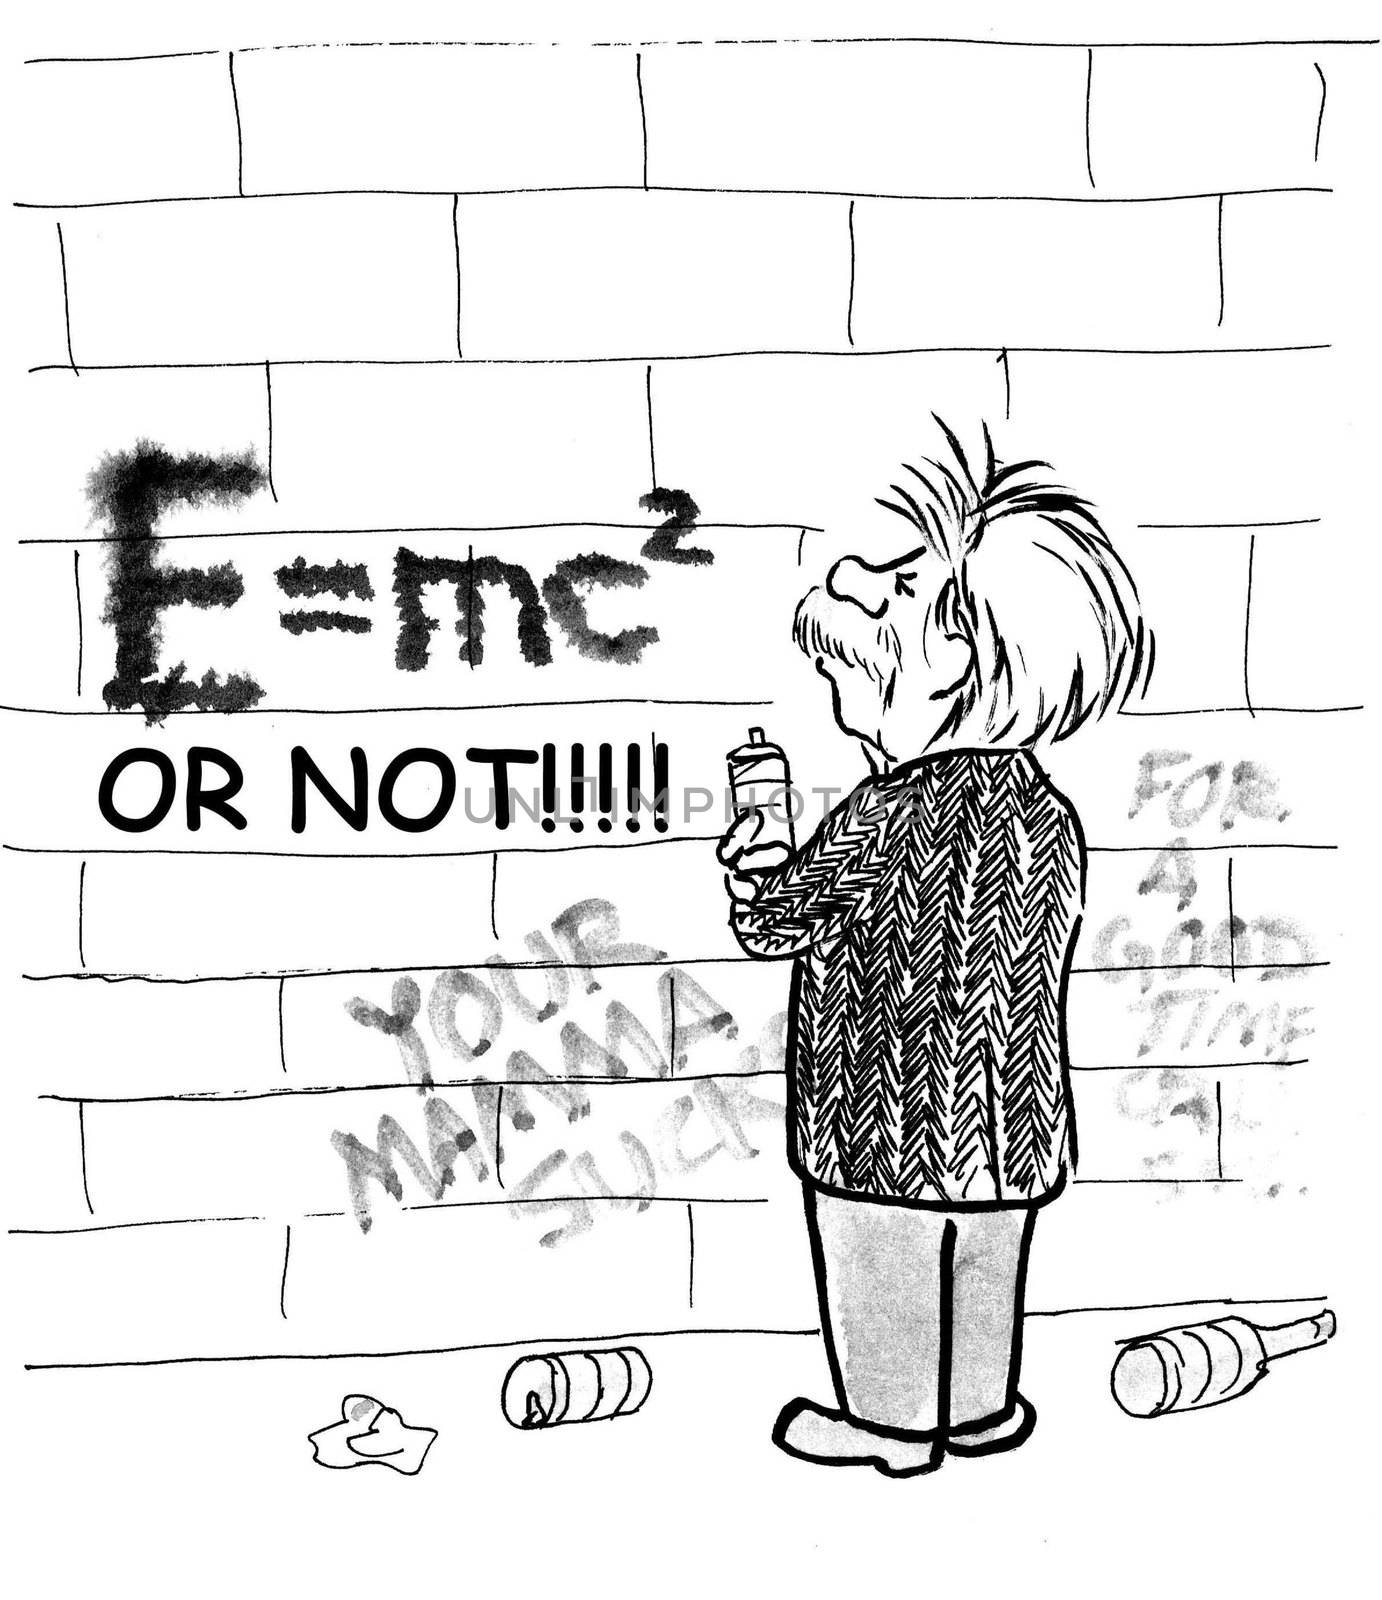 Einstein is solving his great energy equation with spray painted graffiti.